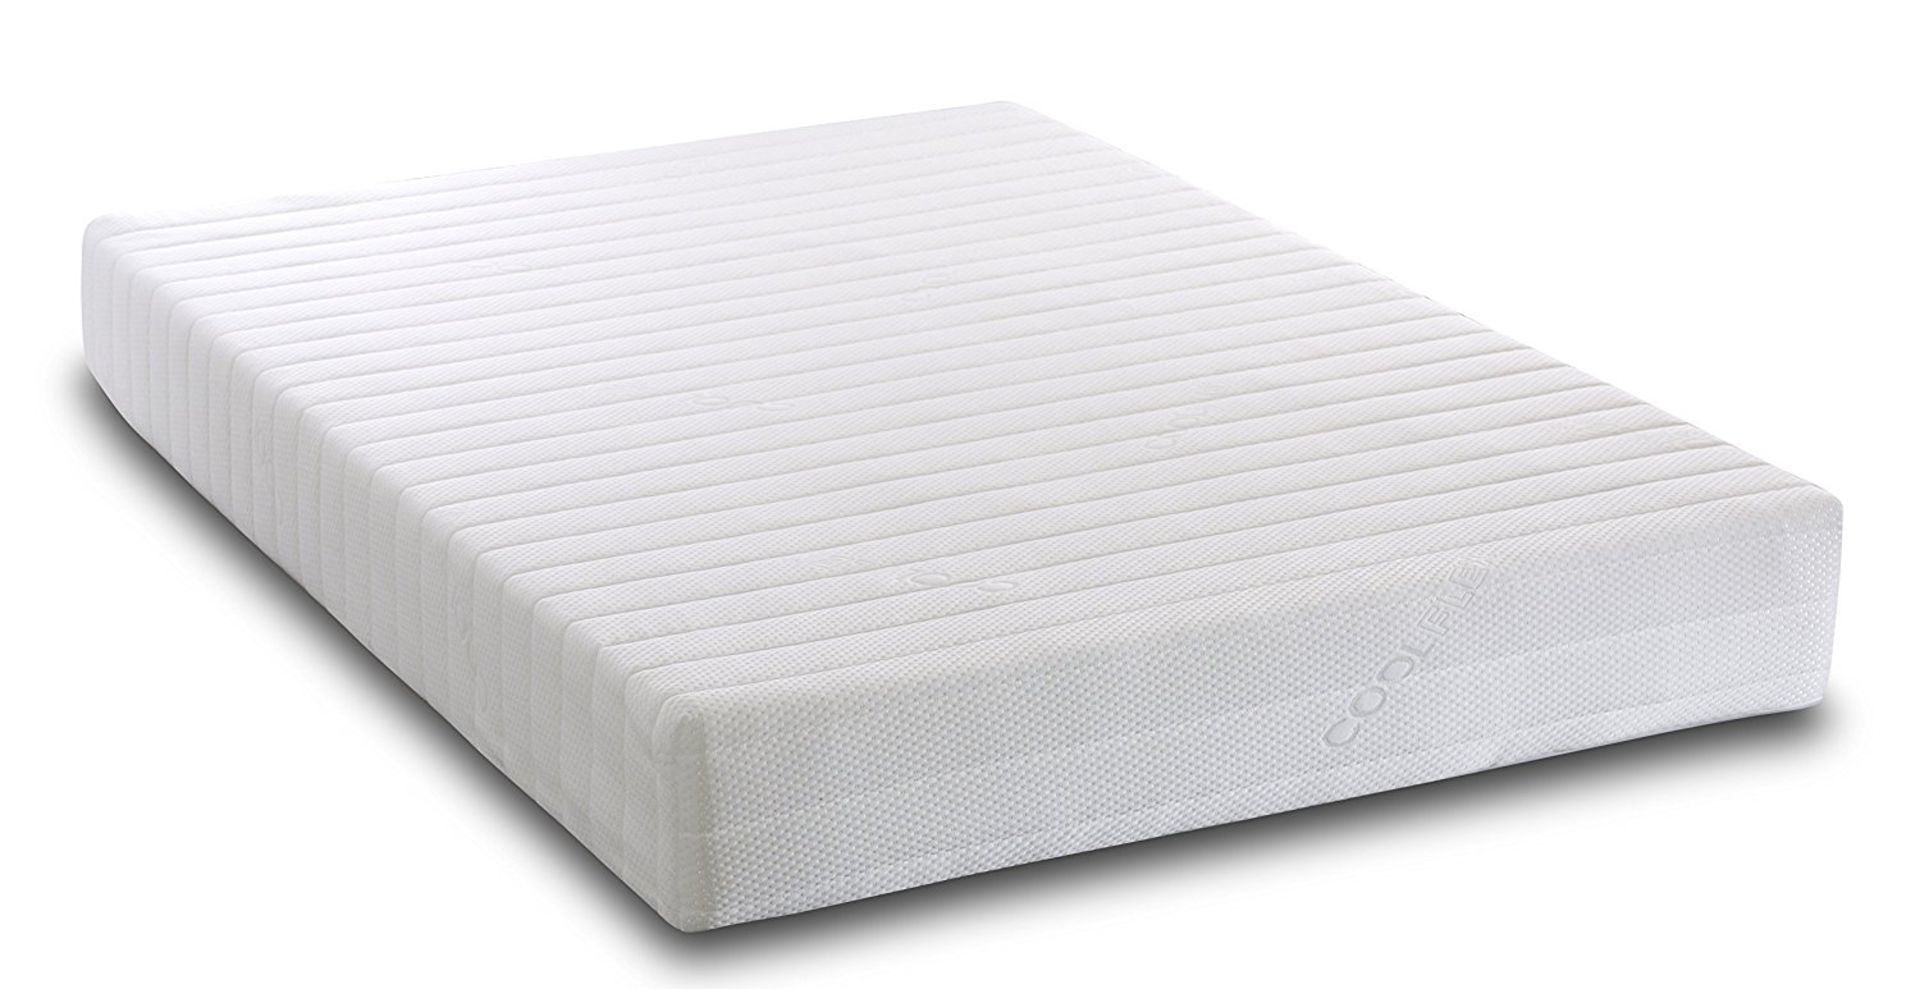 1 BRAND NEW BAGGED, ROLLED AND BOXED CASPIAN 4FT SMALL DOUBLE MEMORY FOAM MATTRESS 22CM THICKNESS